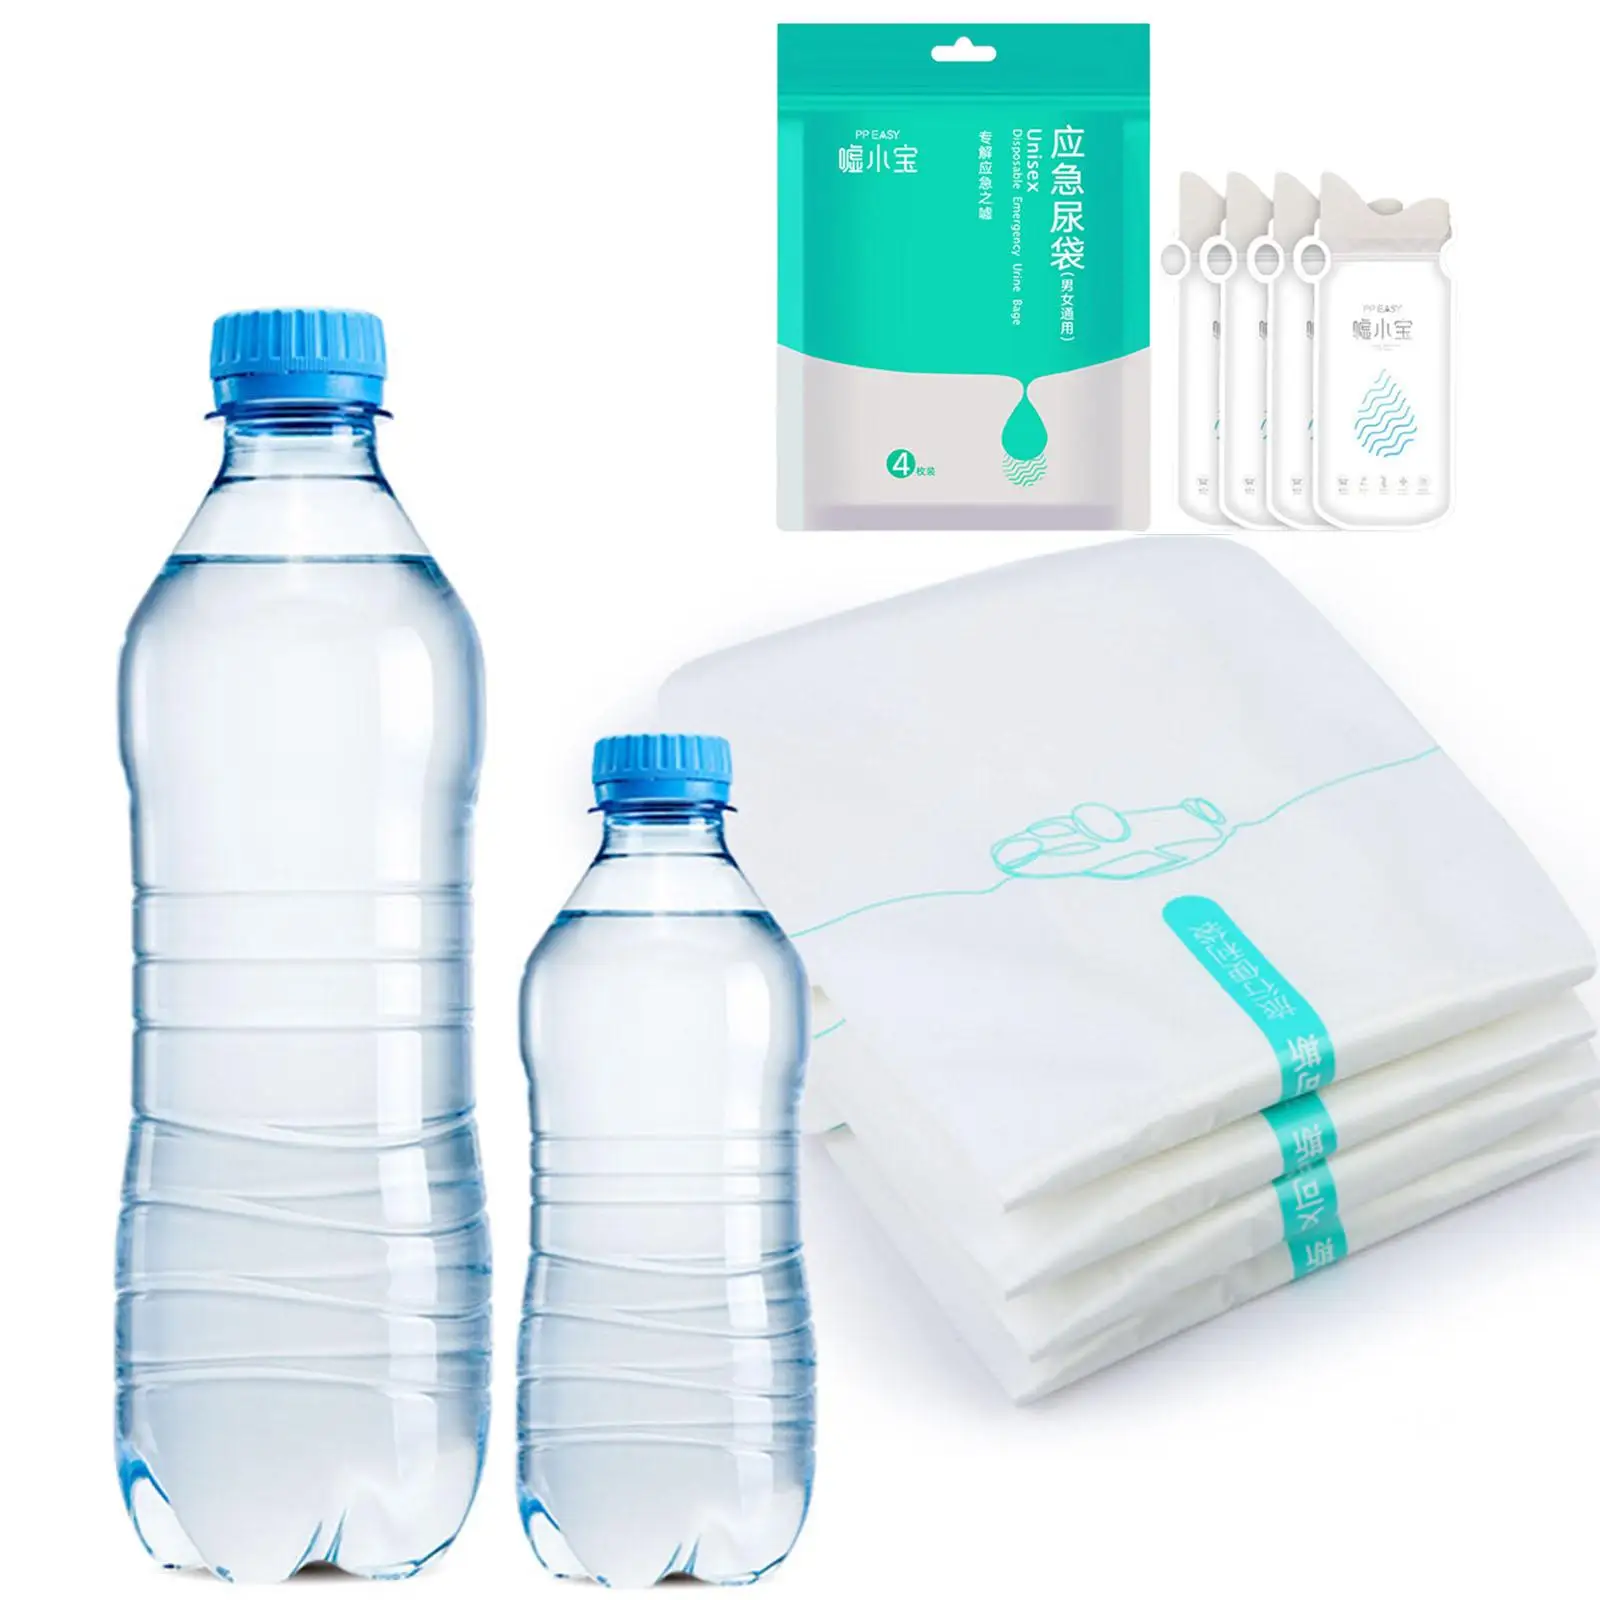 4 Pieces Portable Disposable Urine Bags for Camping Children Patient